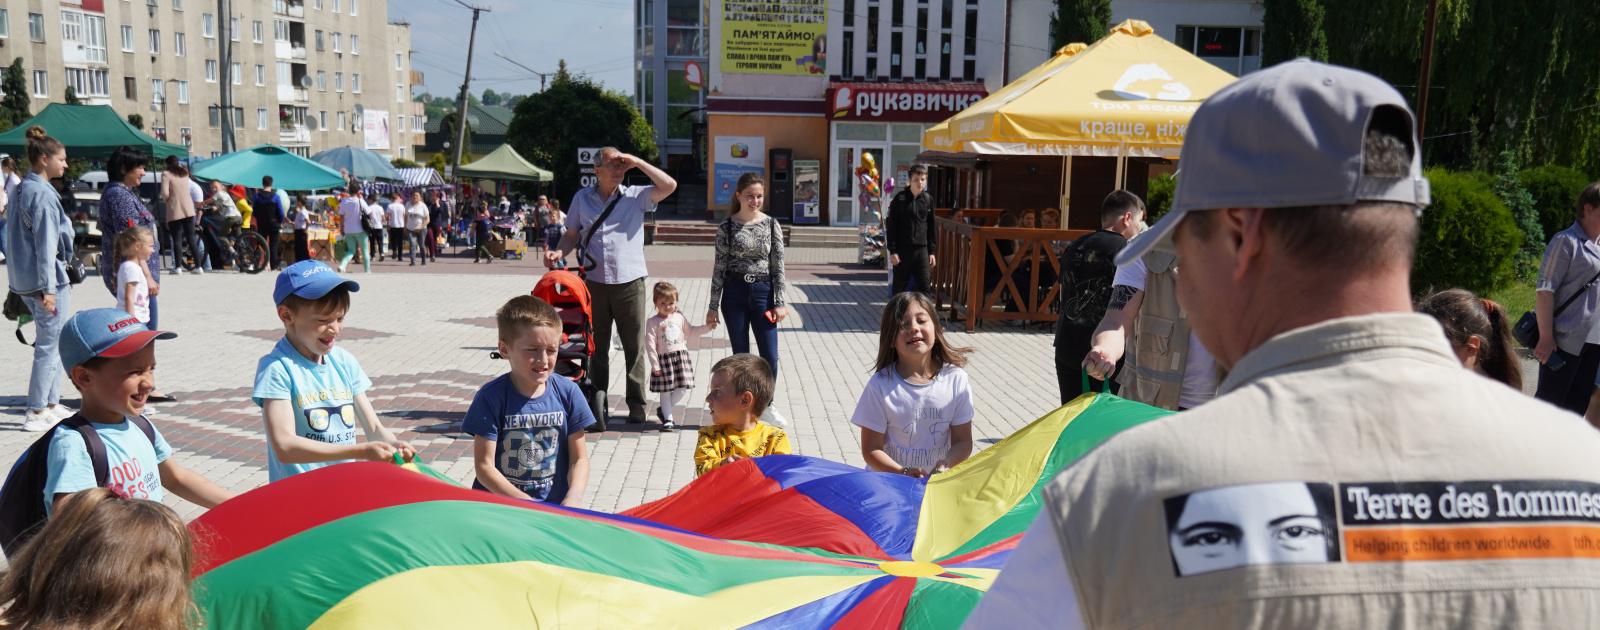 psycho-social activity with children affected by the war in Ukraine, Summer 2022